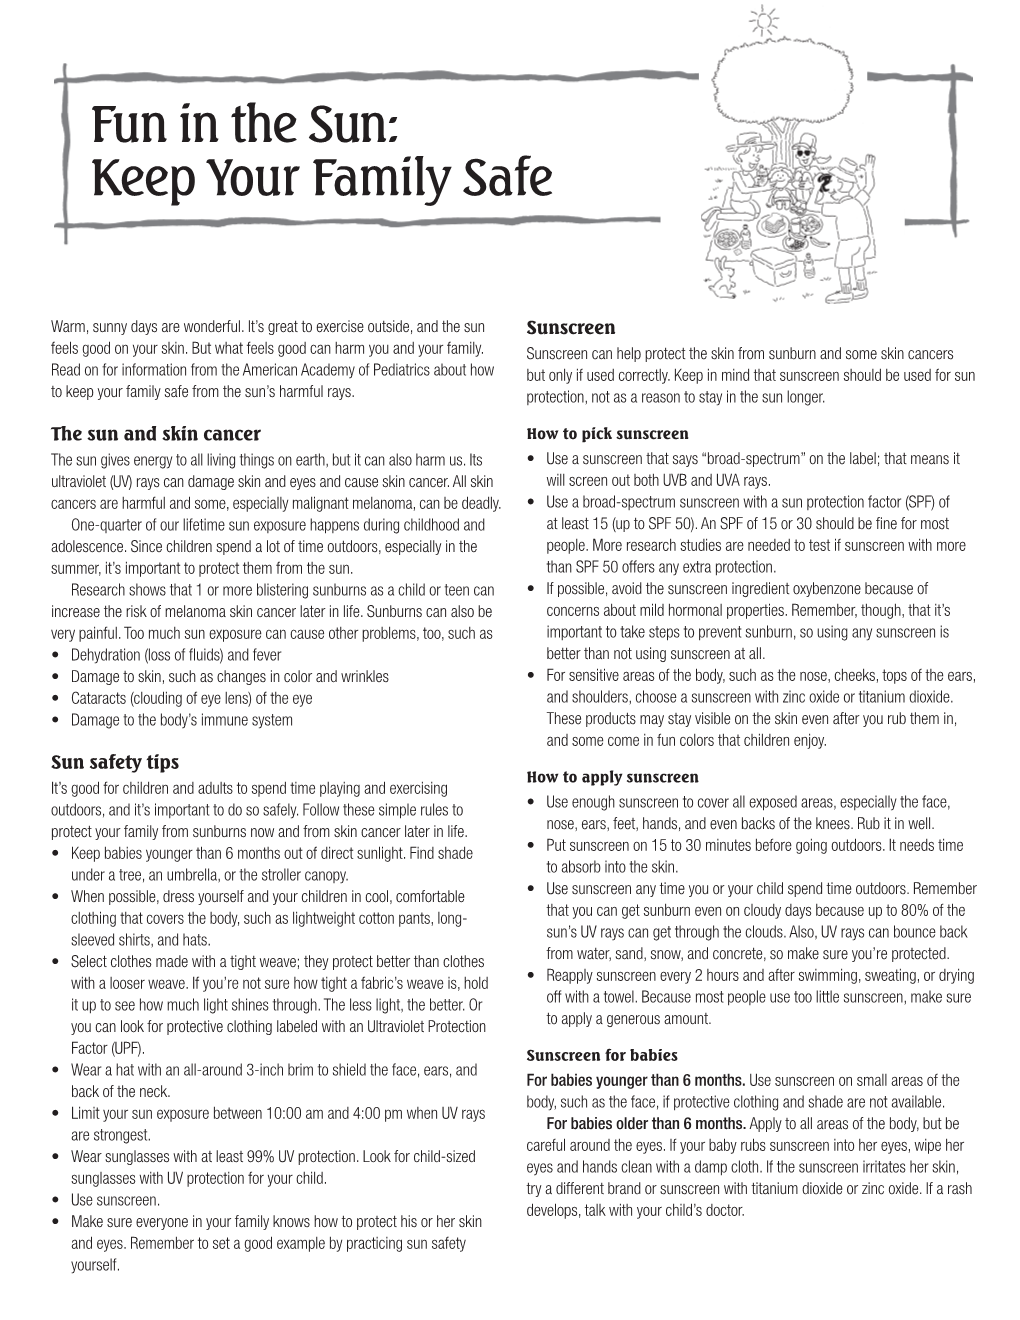 Fun in the Sun: Keep Your Family Safe